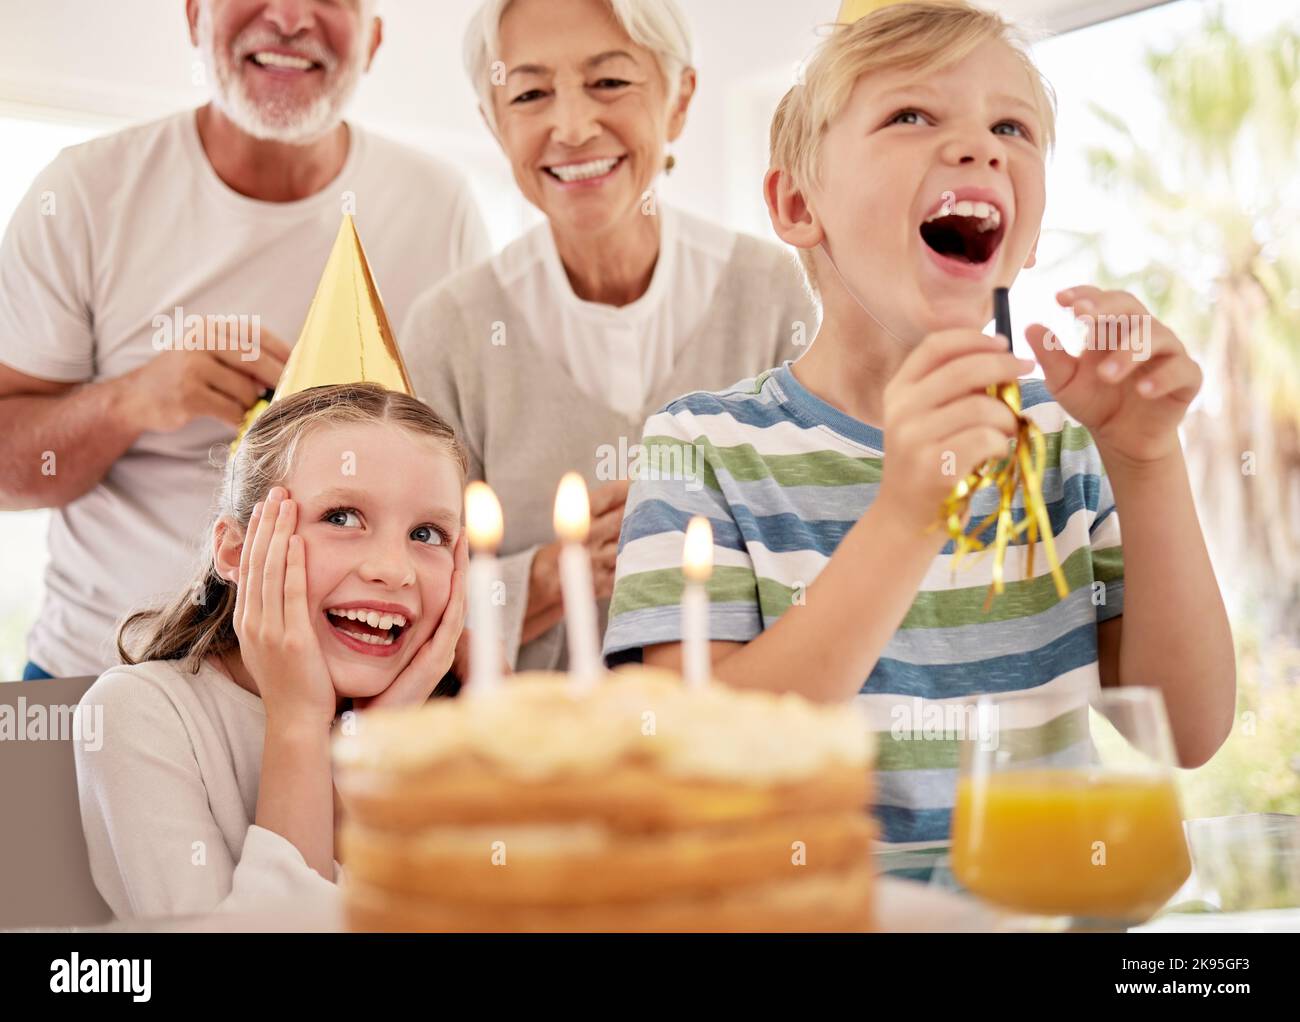 Happy birthday, family and girl with a cake in a party celebration with grandparents and excited sibling or brother. Smile, happiness and young child Stock Photo